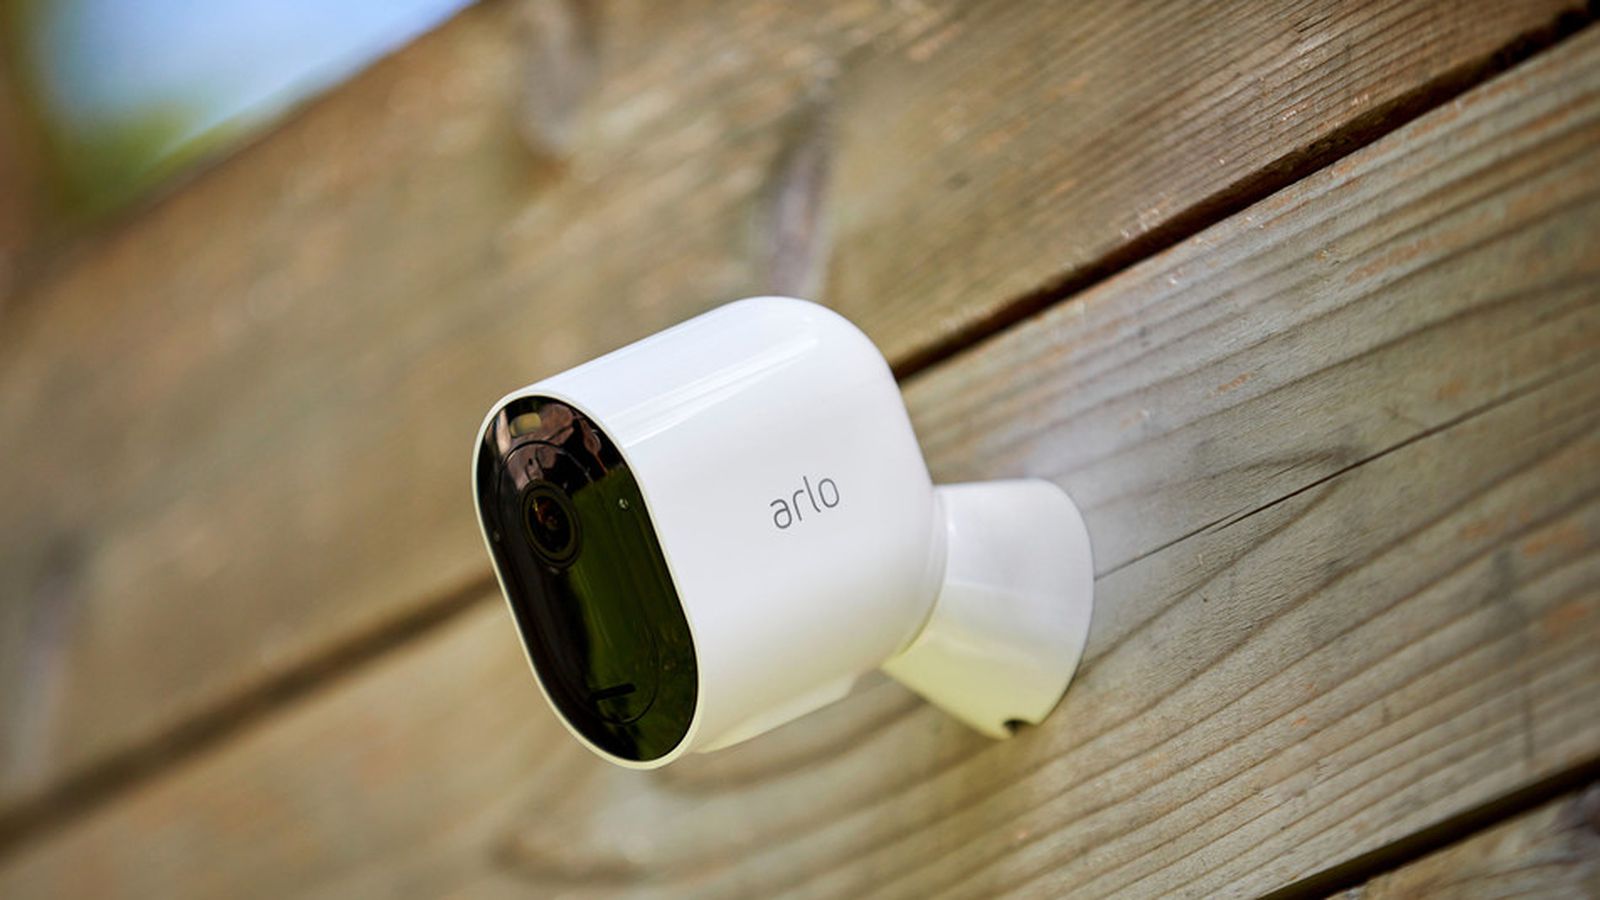 Introduces Pro 4 Security Camera With Easier Wi-Fi Setup, But Lacks HomeKit at Launch [Updated] - MacRumors